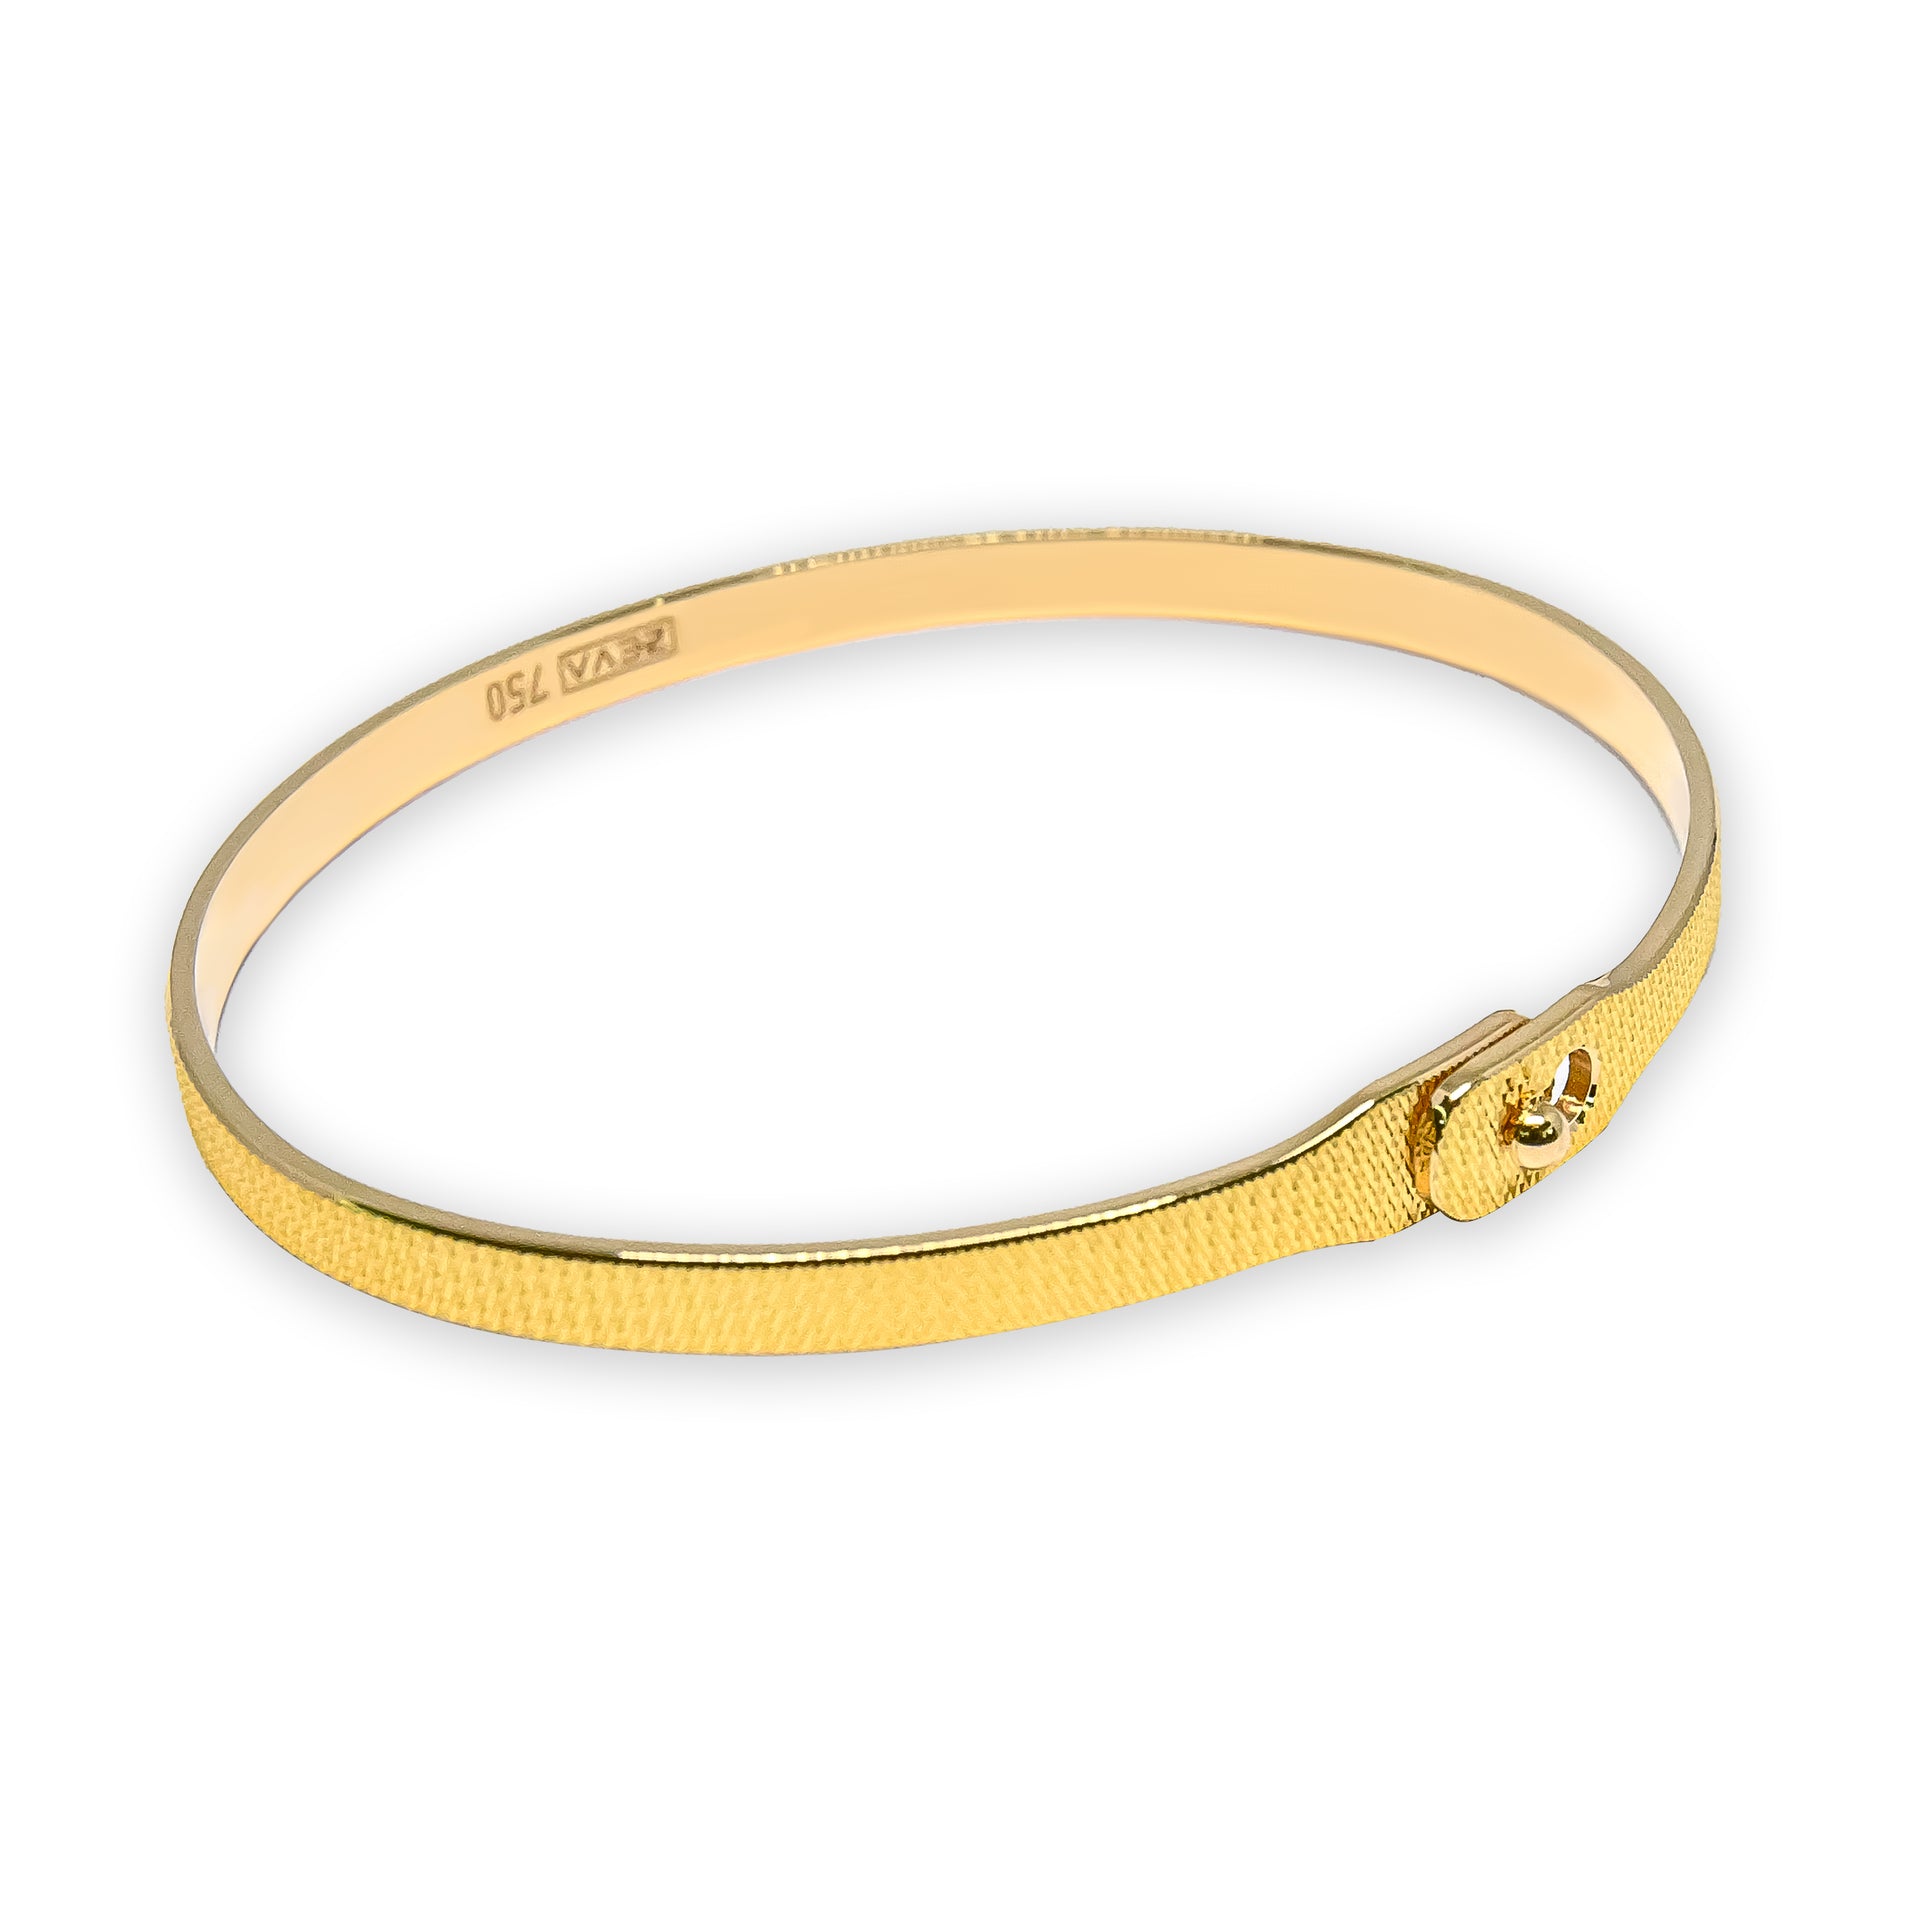 Bracelet WIRED 4mm flexible with pin claps yellow gold 18k 750